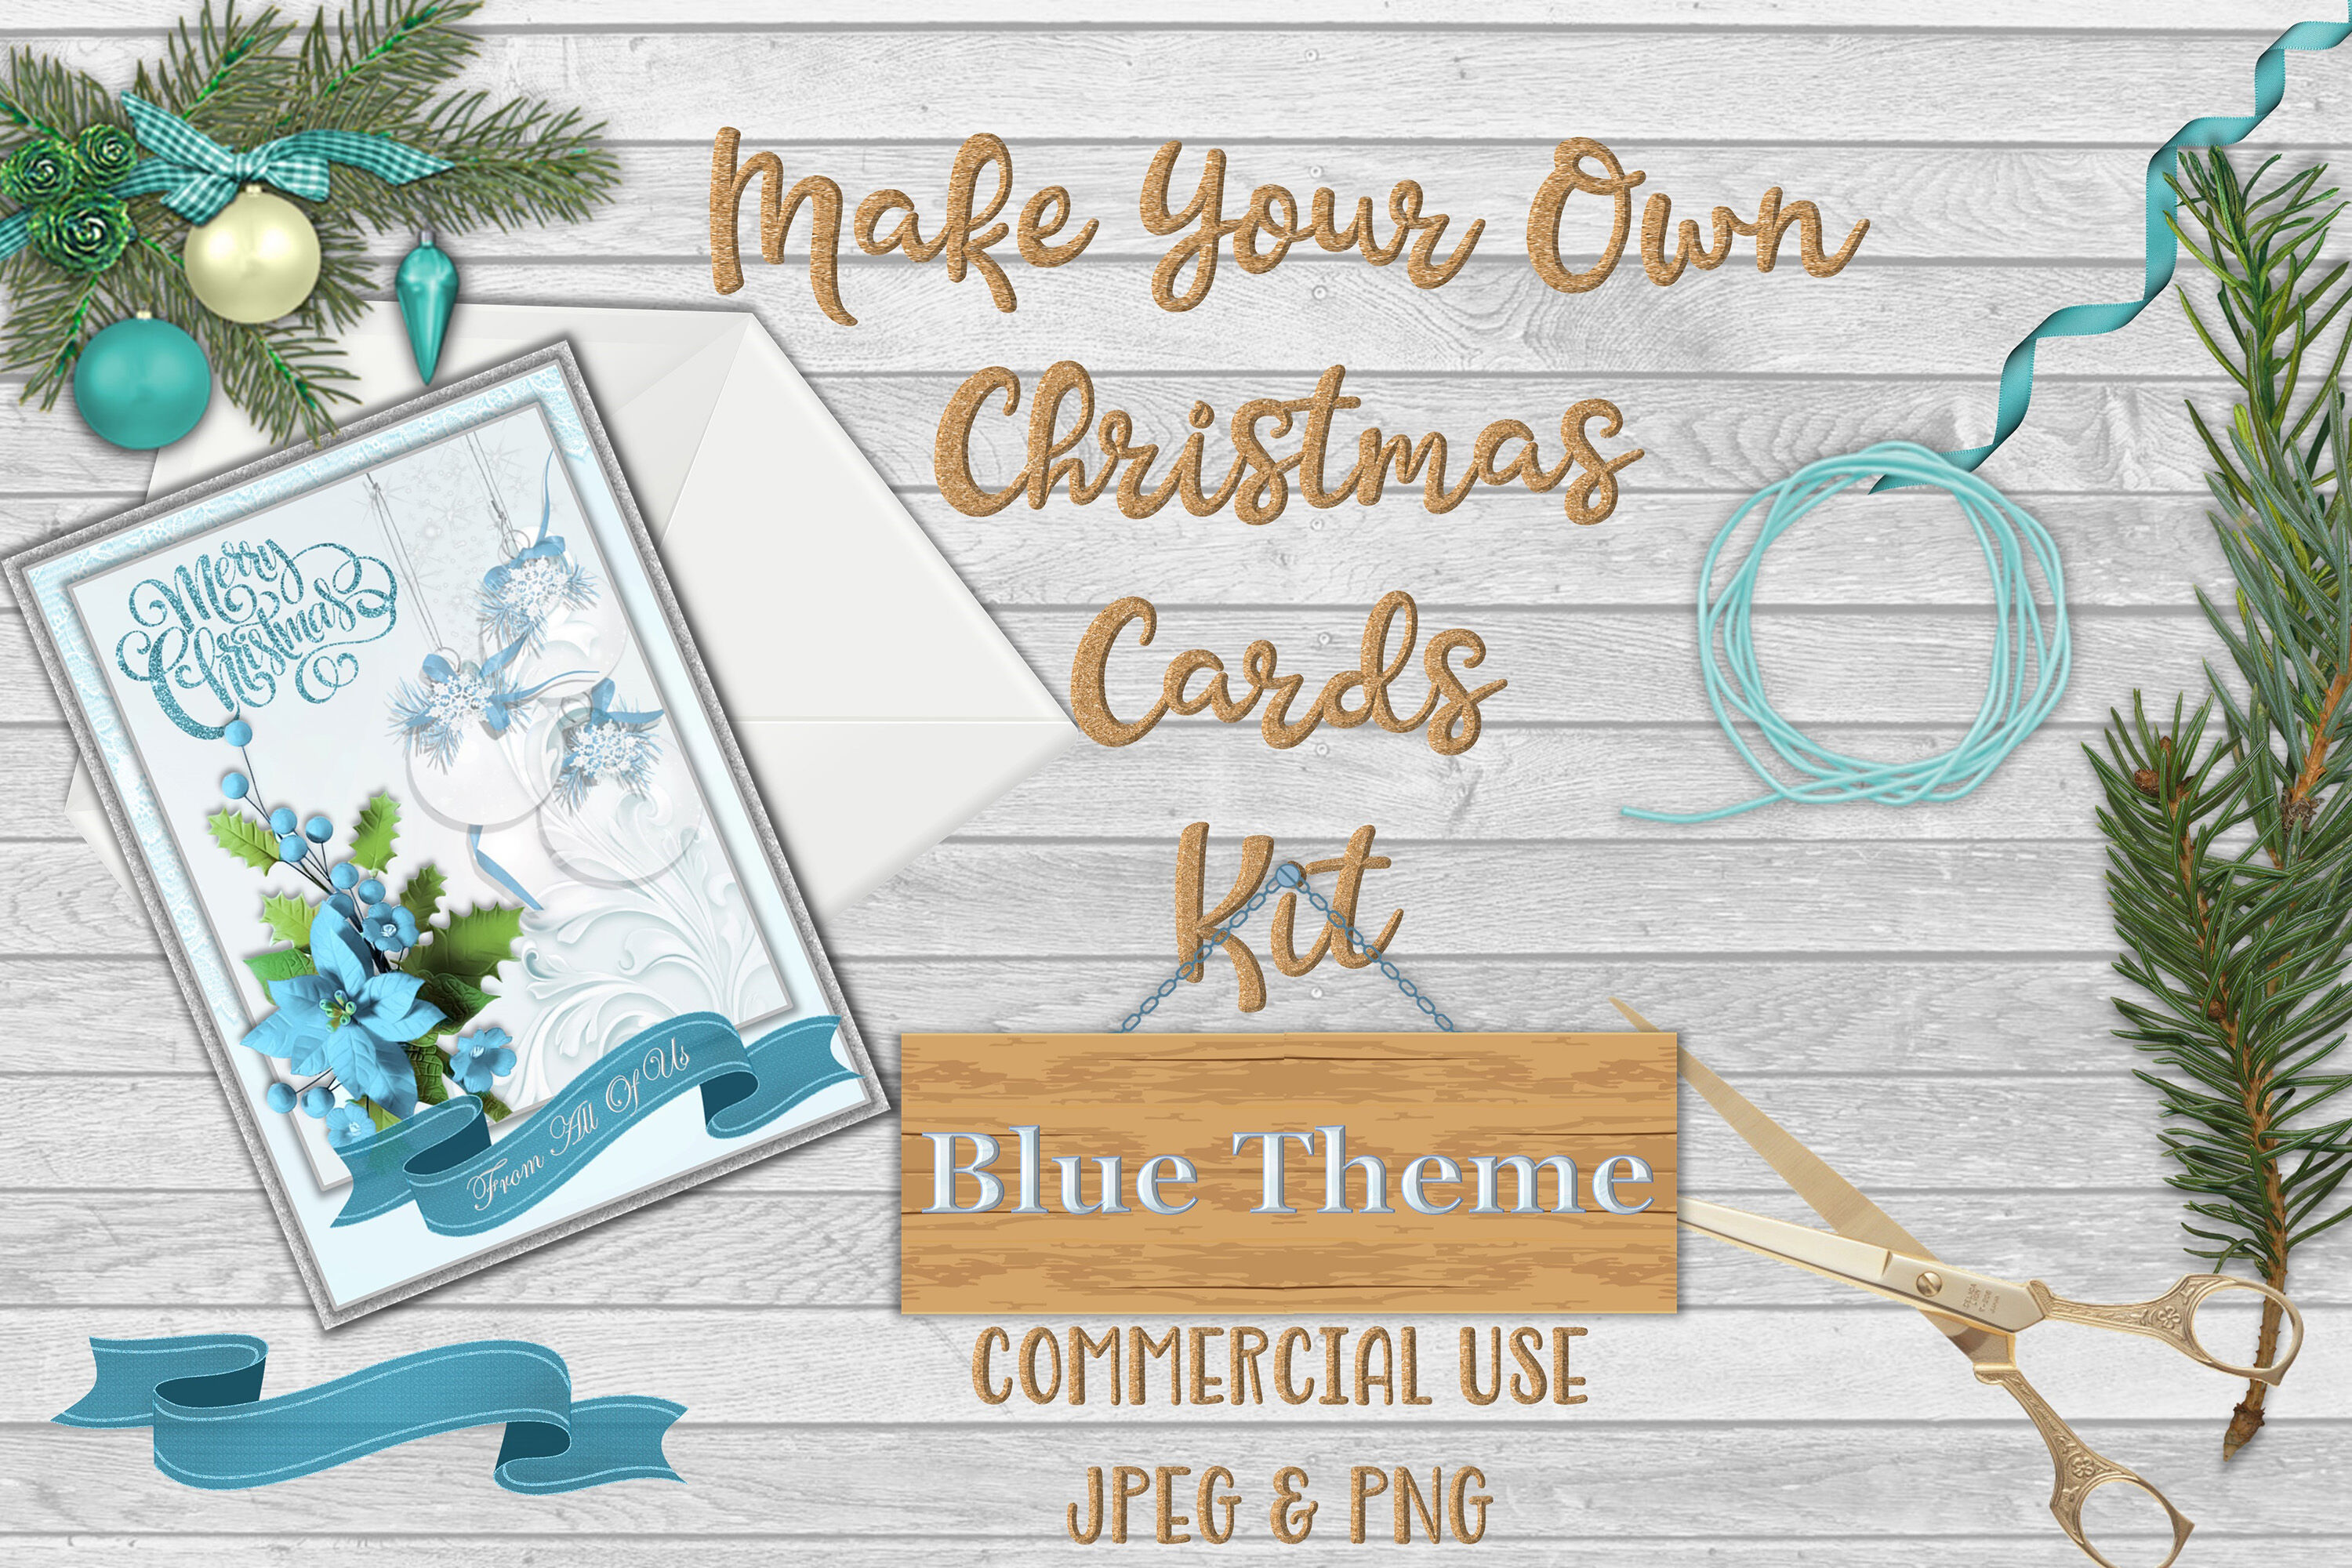 Christmas Card Making Kit Printable And With Free Clipart By The Paper Princess Thehungryjpeg Com